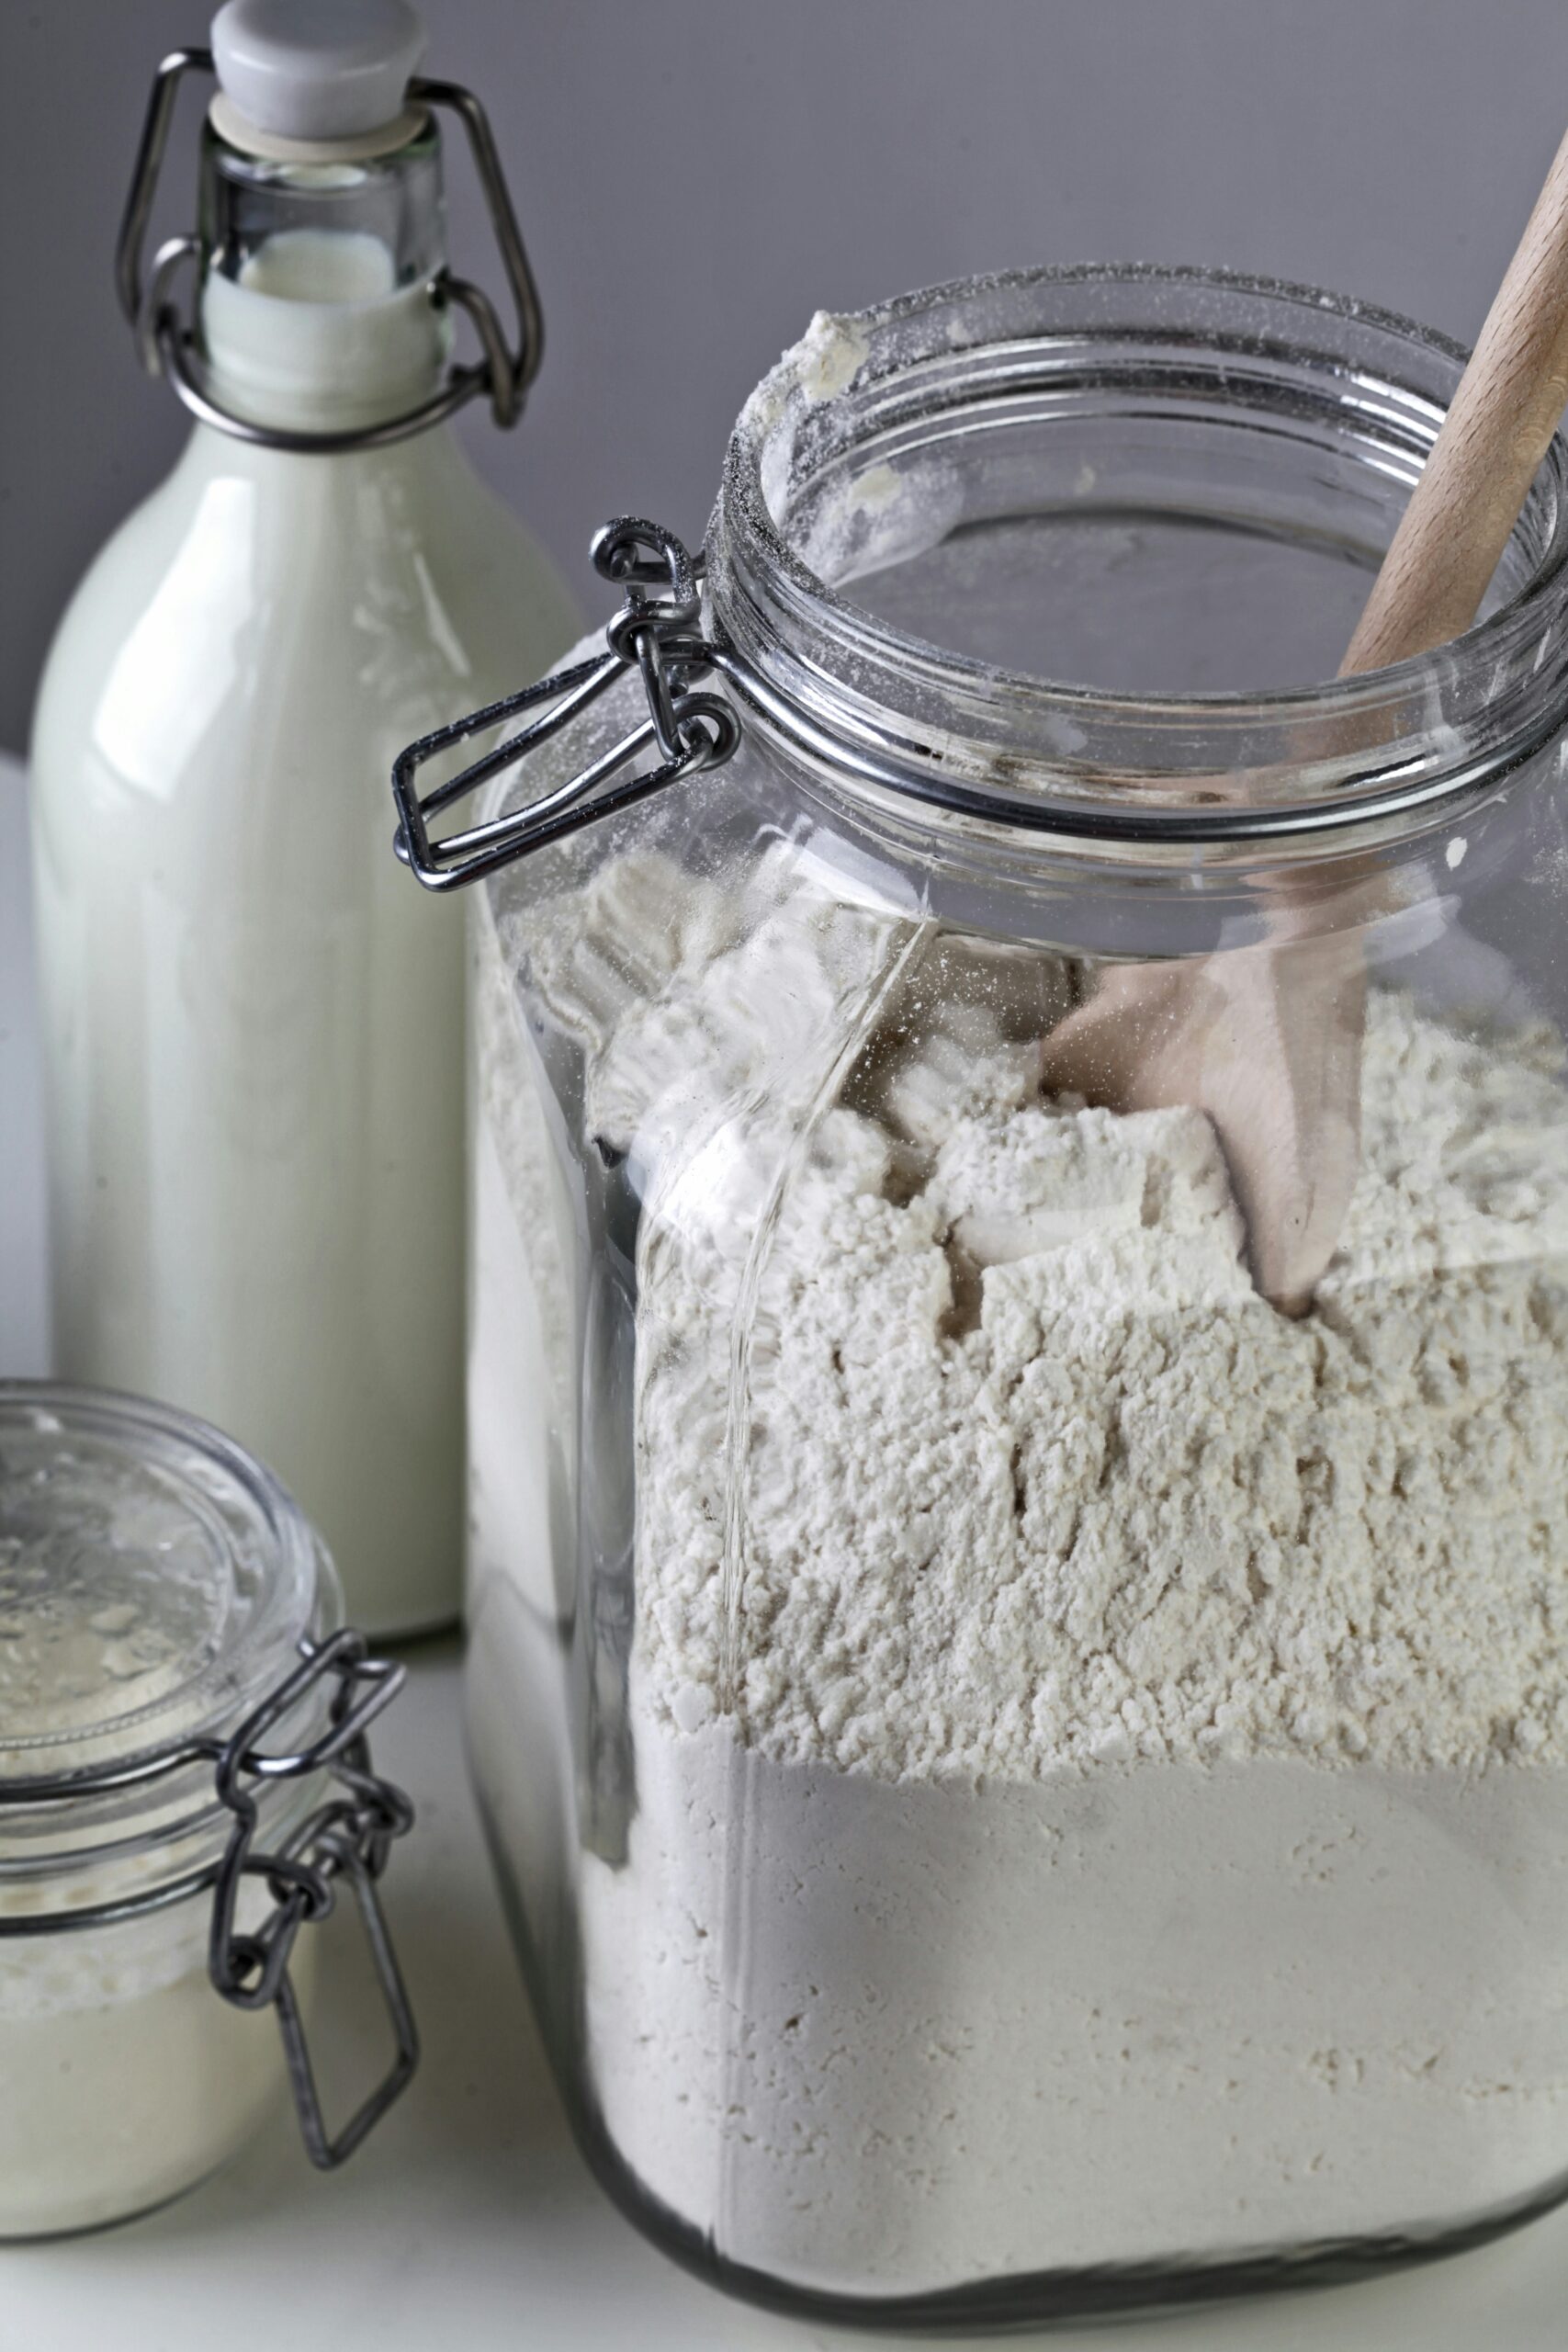 How to Make Self-Rising Flour At Home